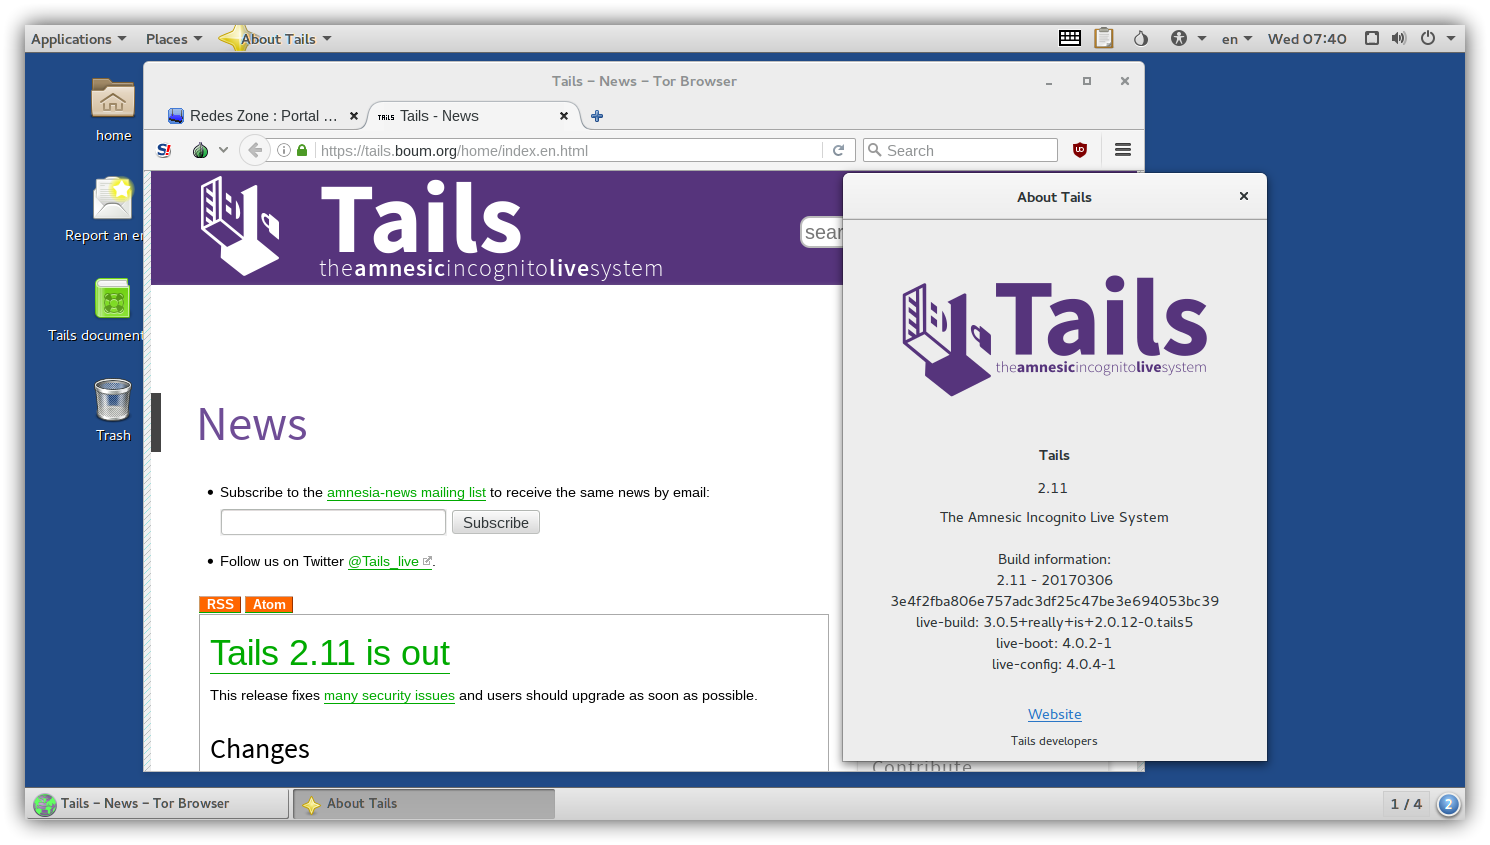 Tails 2.11